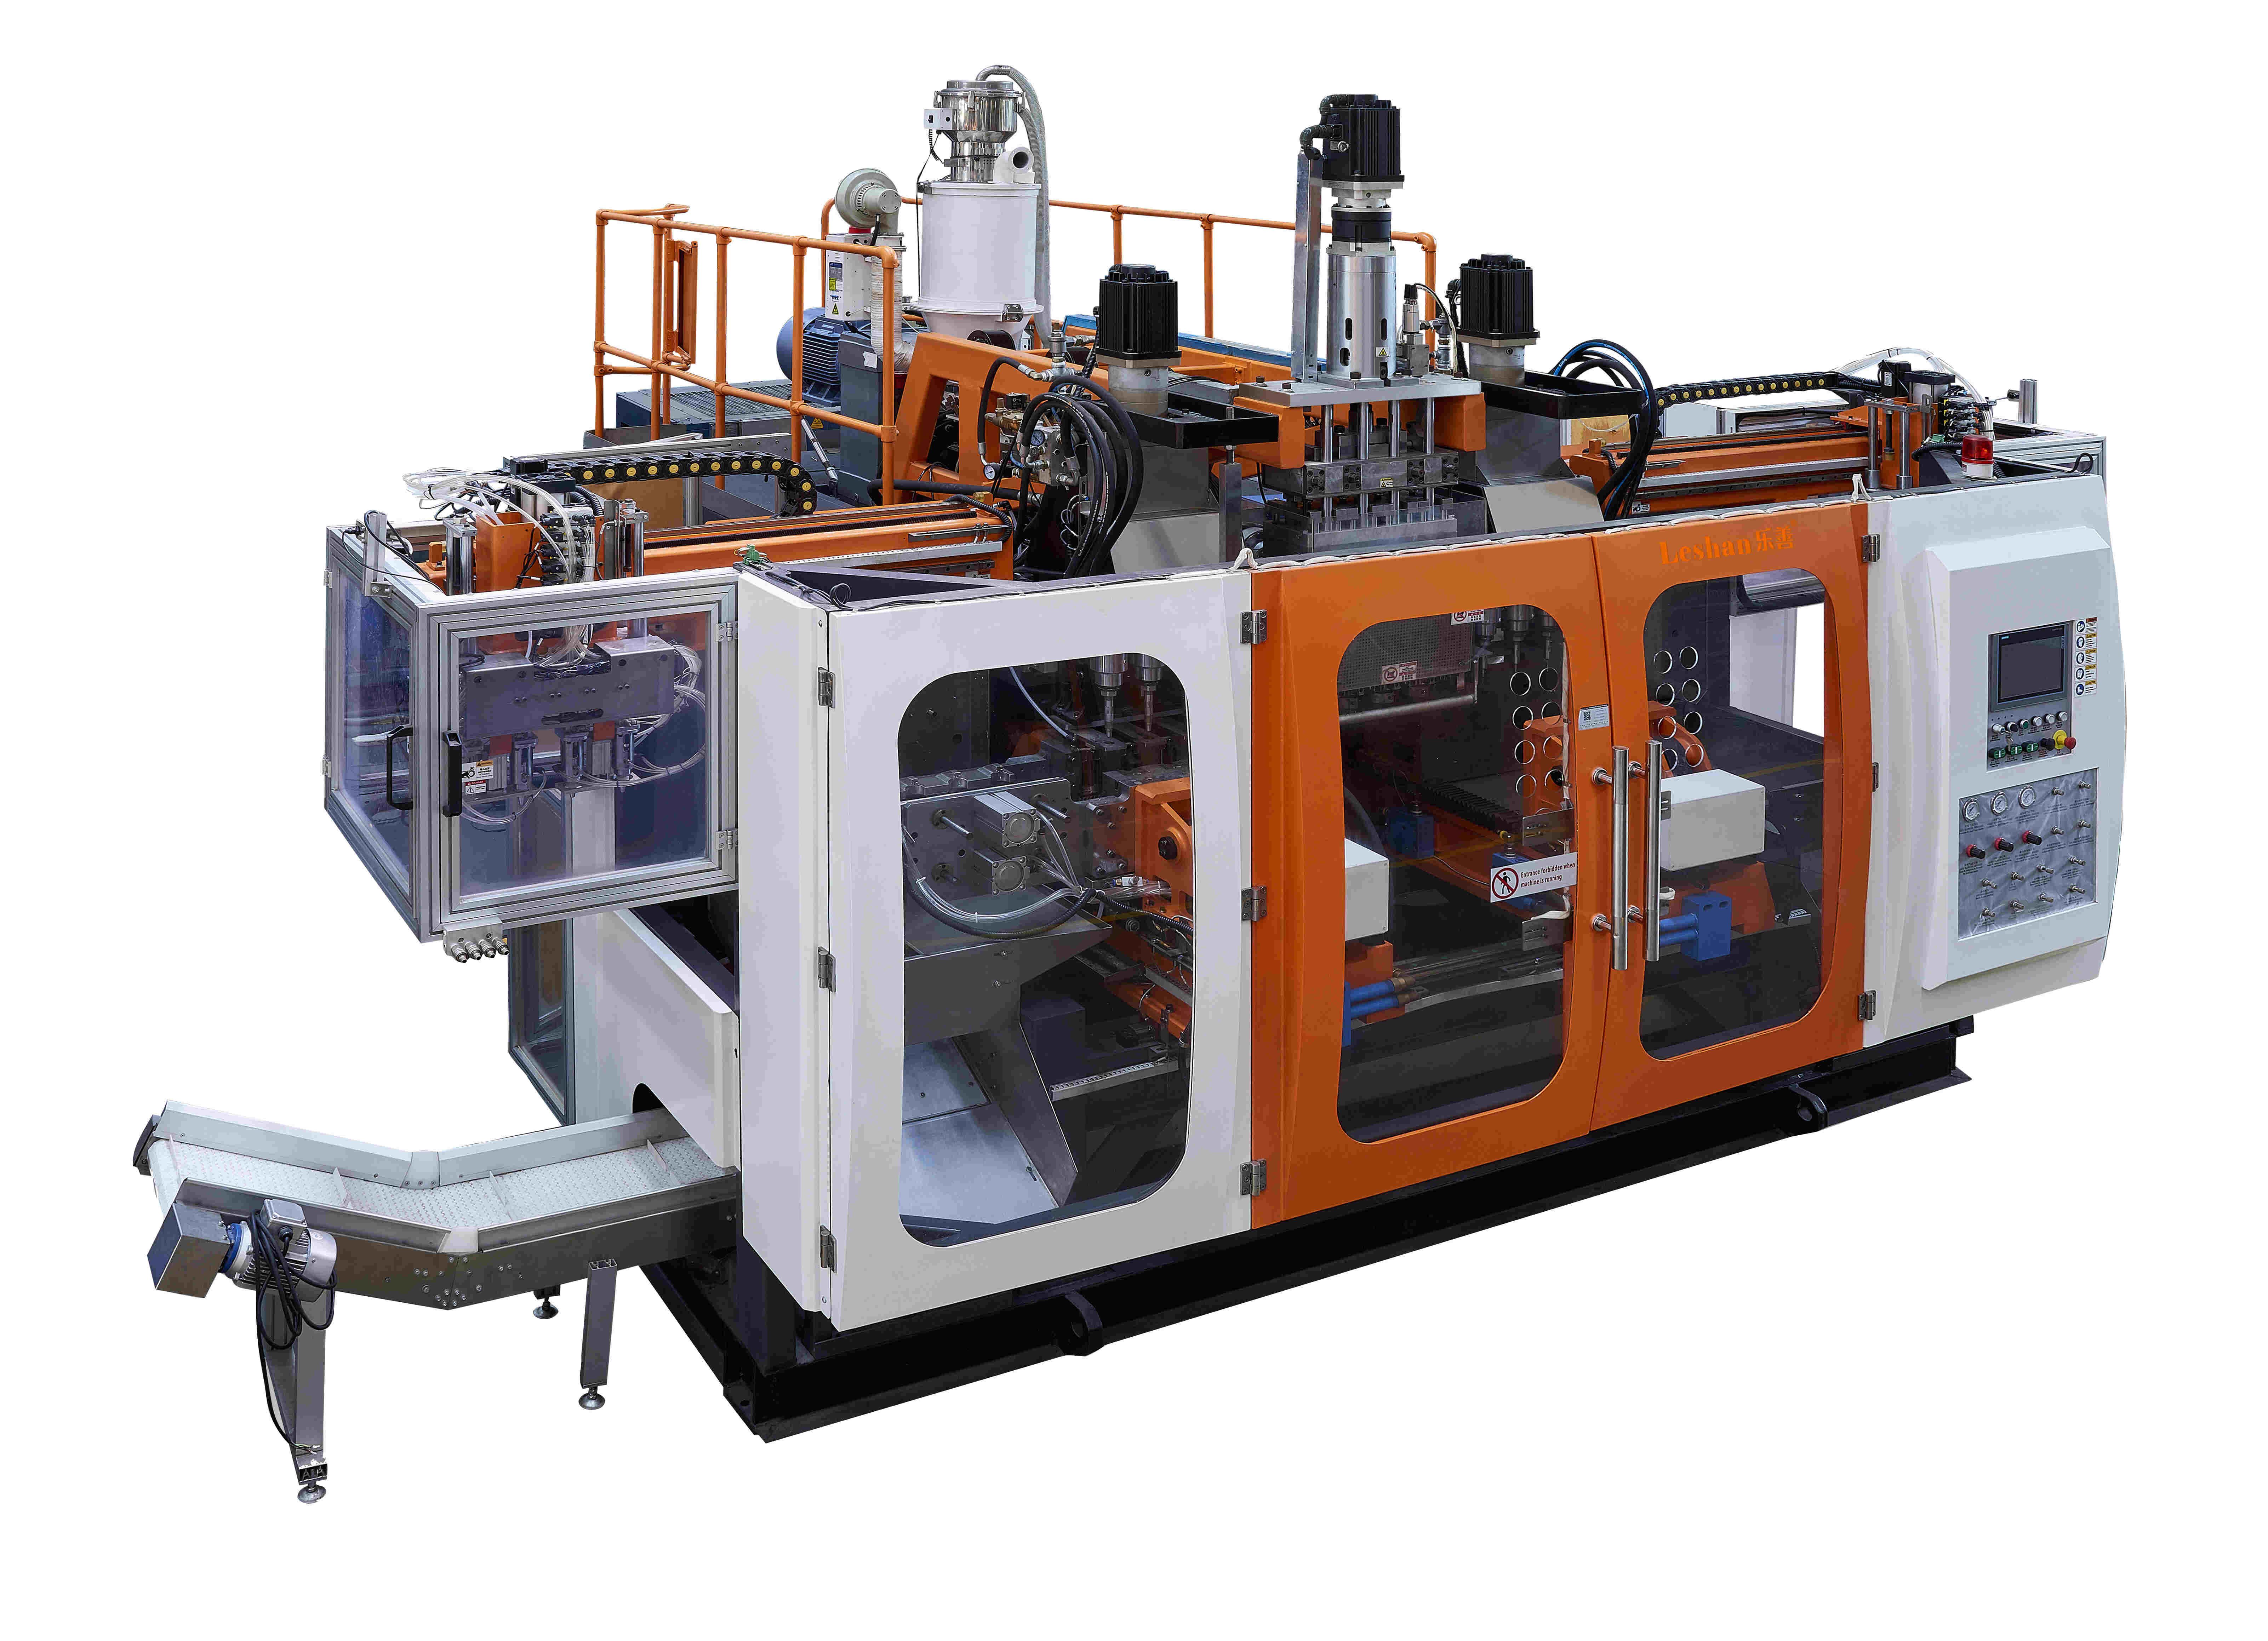 What are the main components of a extrusion blow molding exporter?